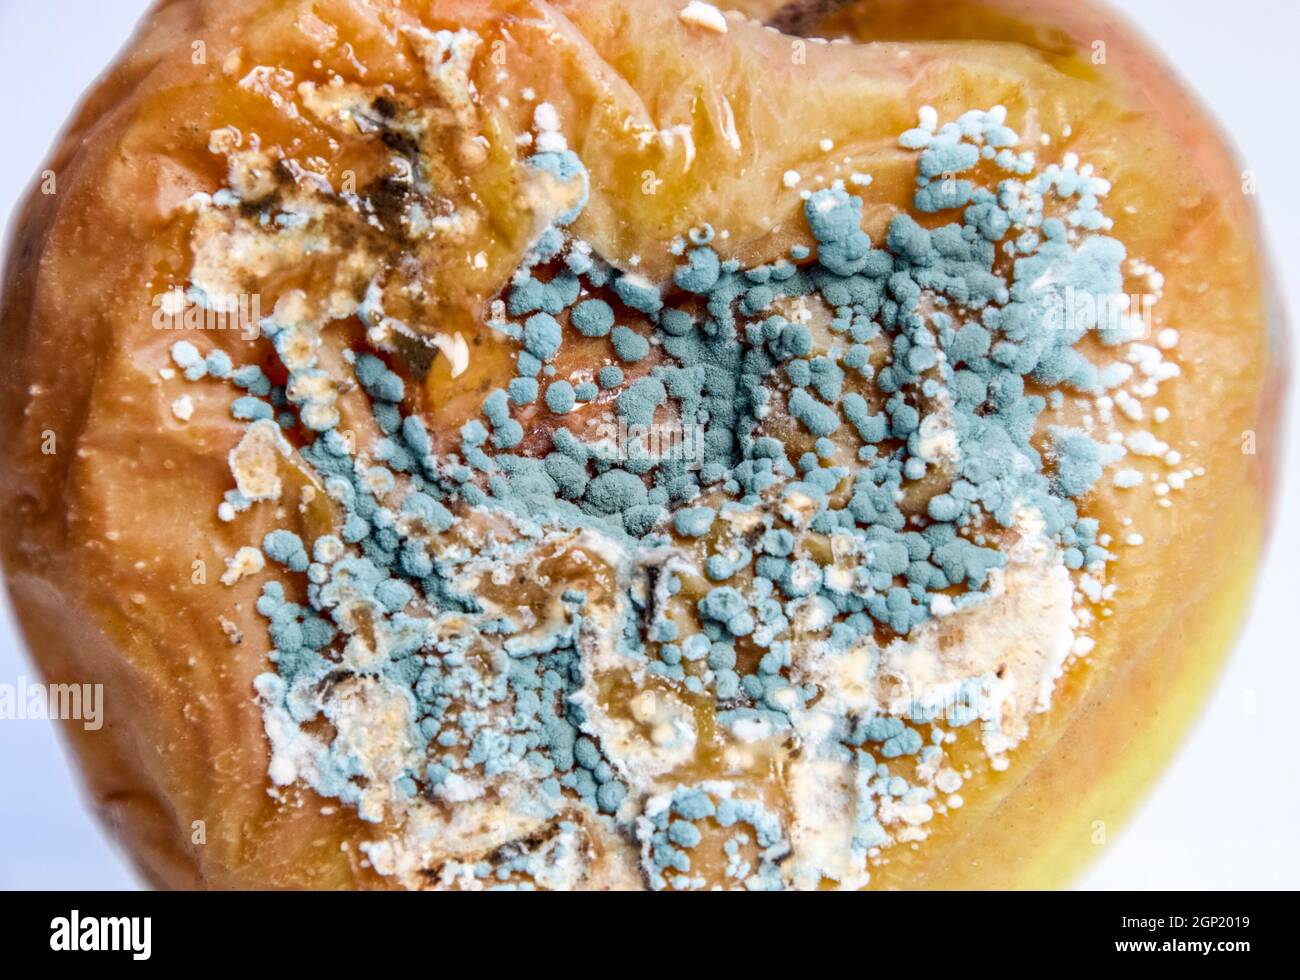 A rotten apple covered with a mold. Stock Photo